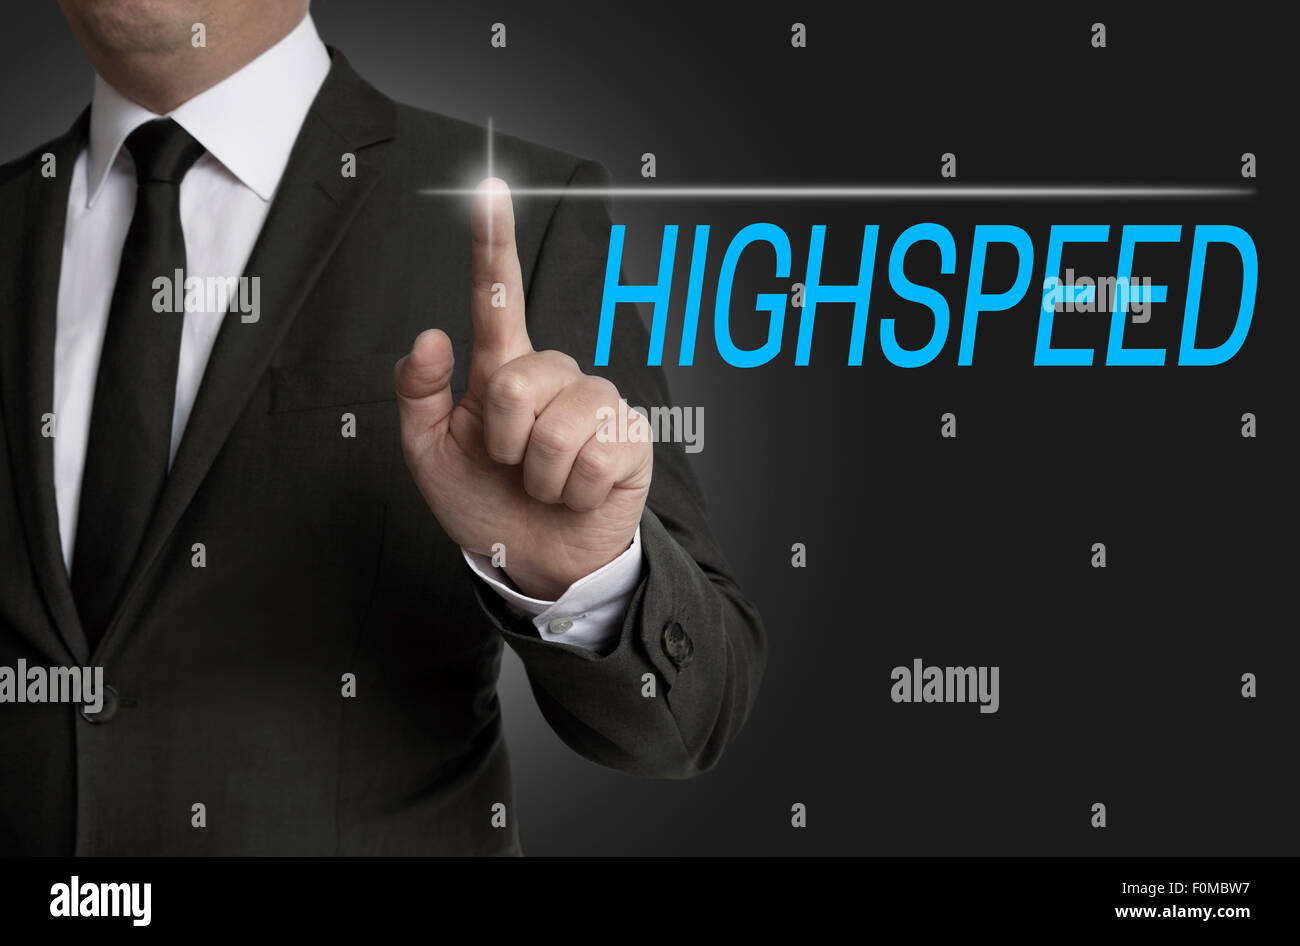 Highspeed Touchscreen is served by businessman. Stock Photo